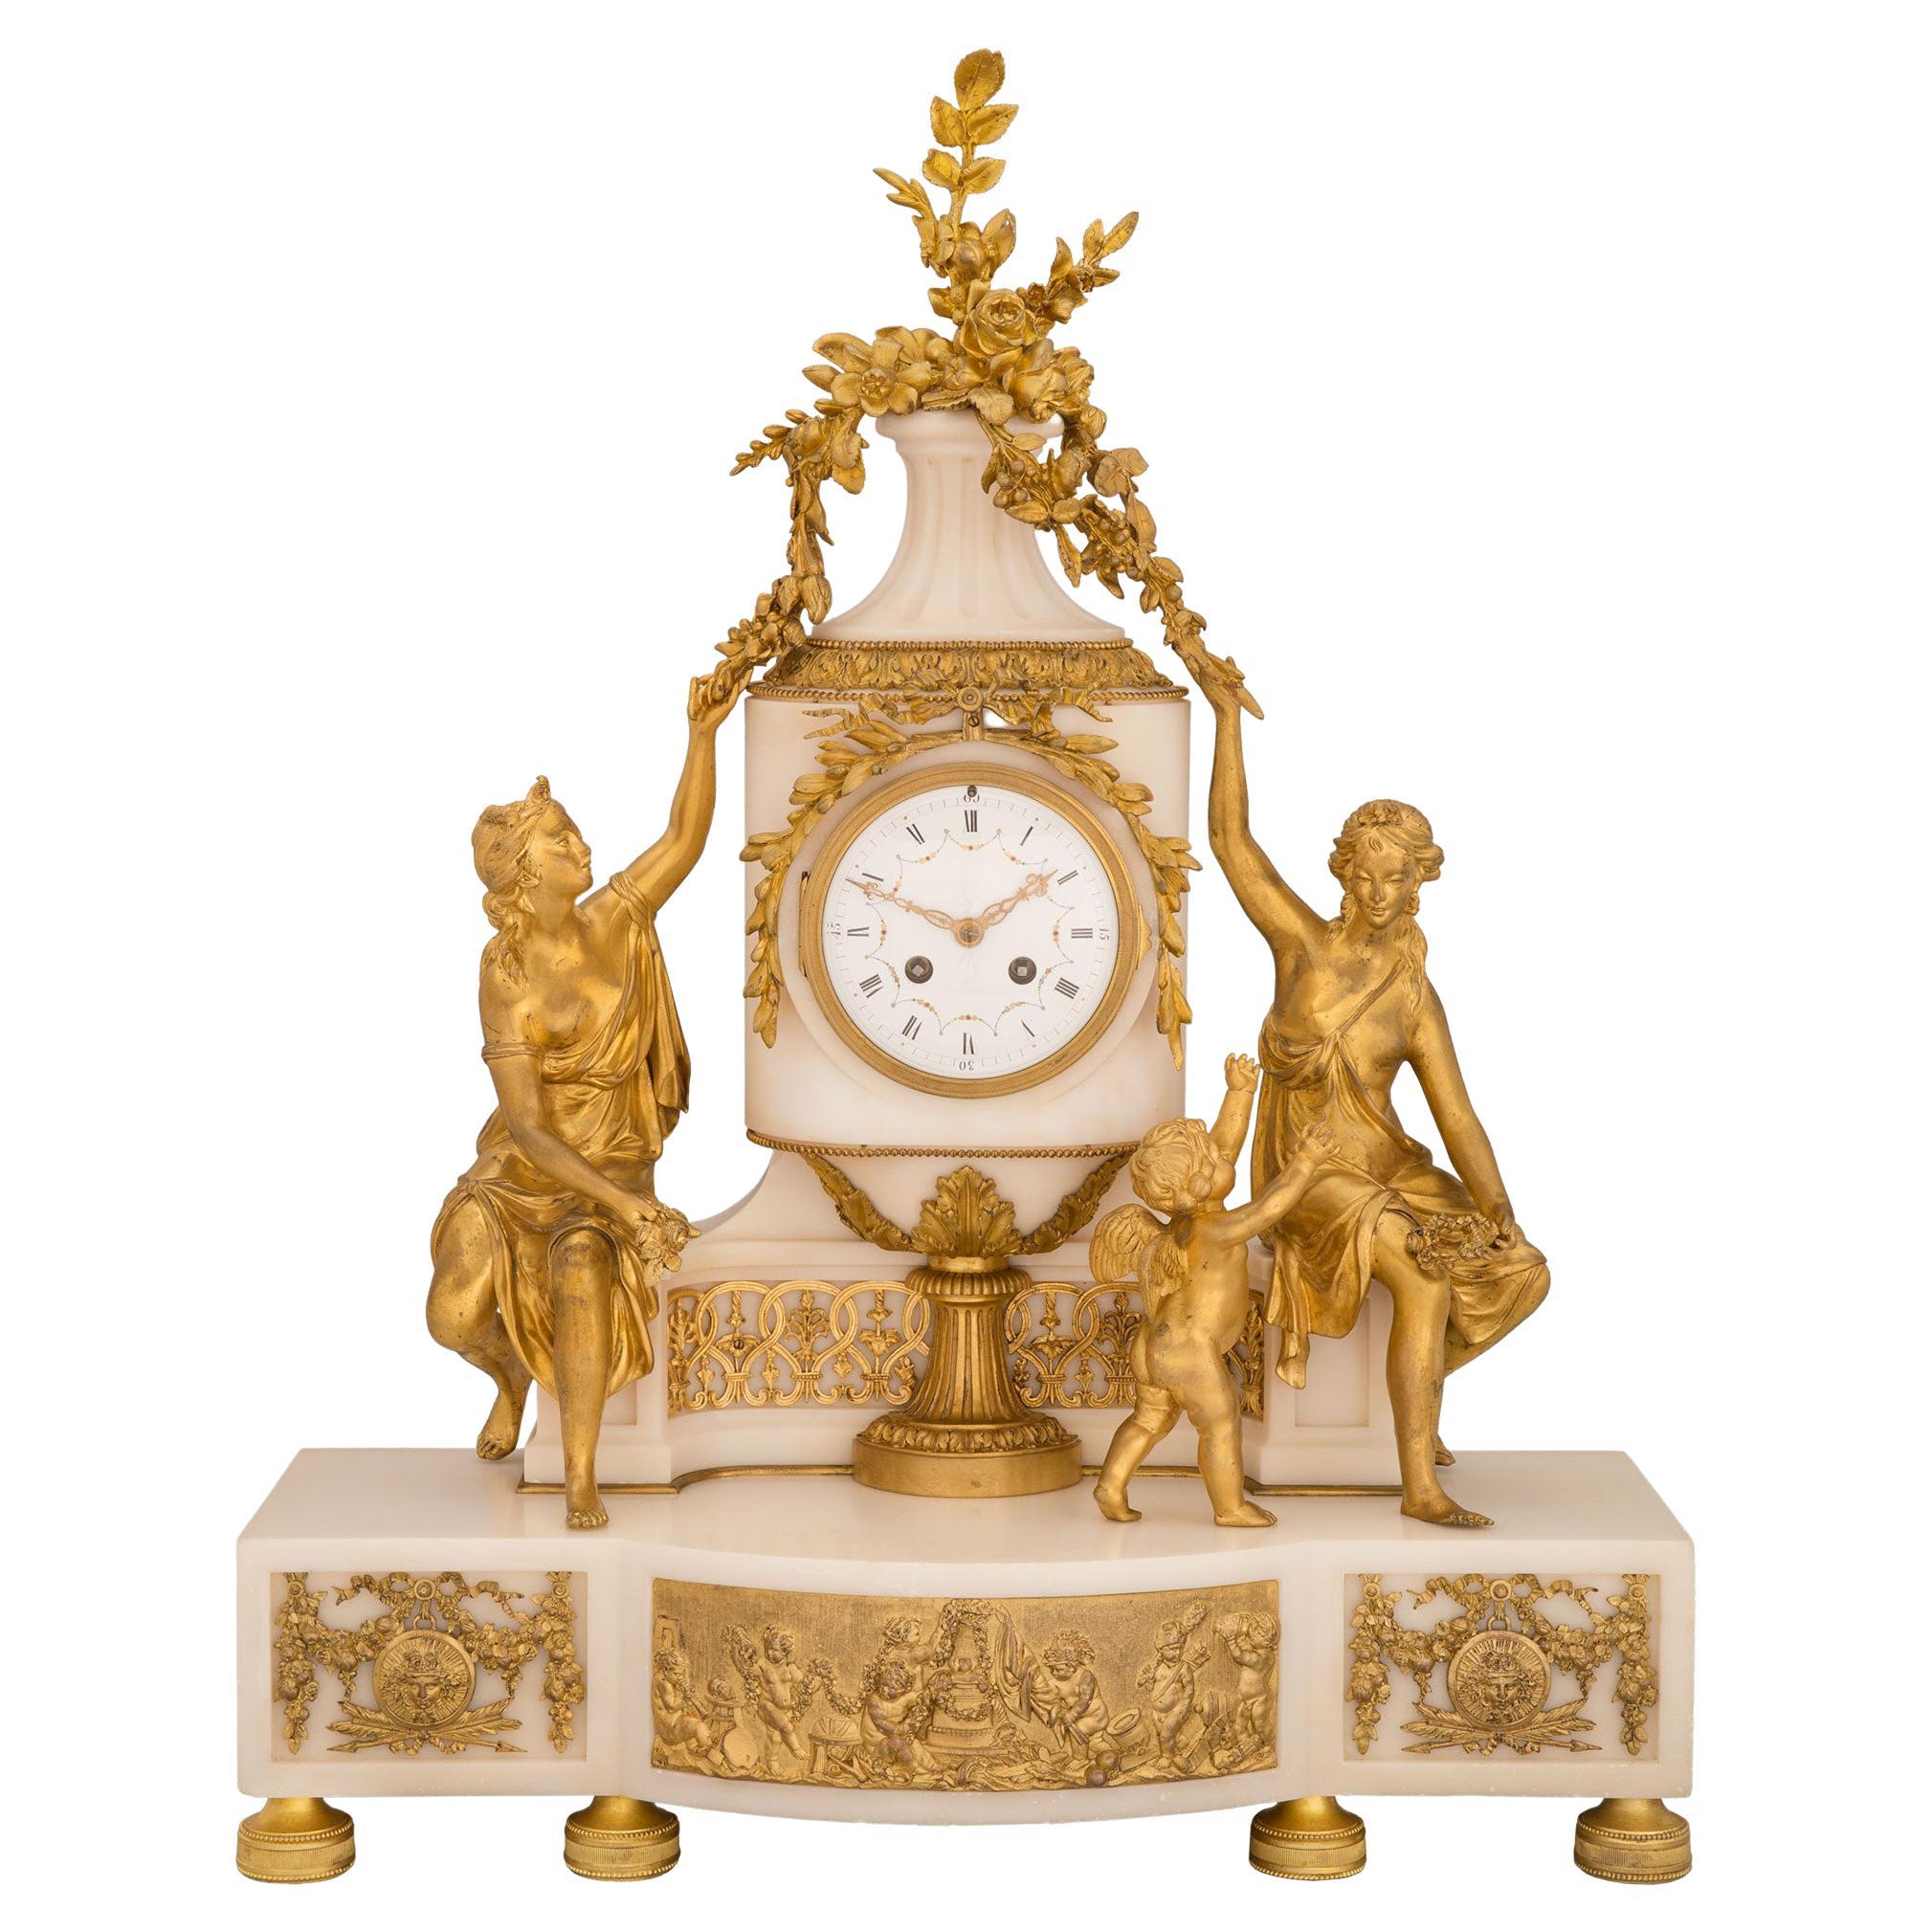 French 19th Century Louis XVI St. Marble and Ormolu Clock